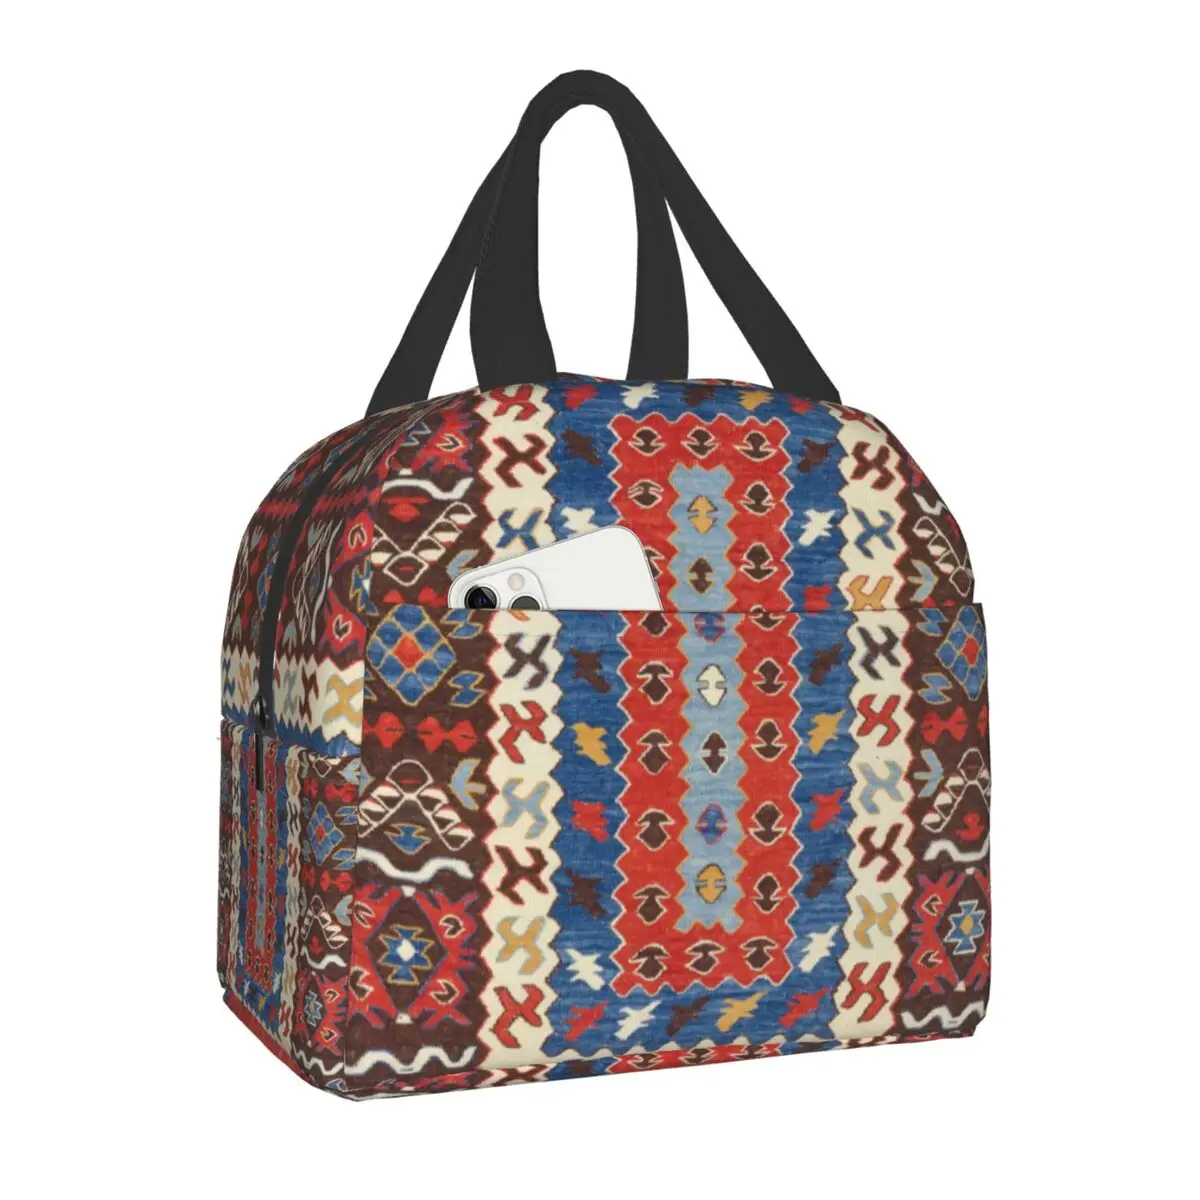 

Turkish Kilim Rug Bohemia Ethnic Print Thermal Insulated Lunch Bag Portable Cooler Warm Food Geometric Lunch Box for Women Kids